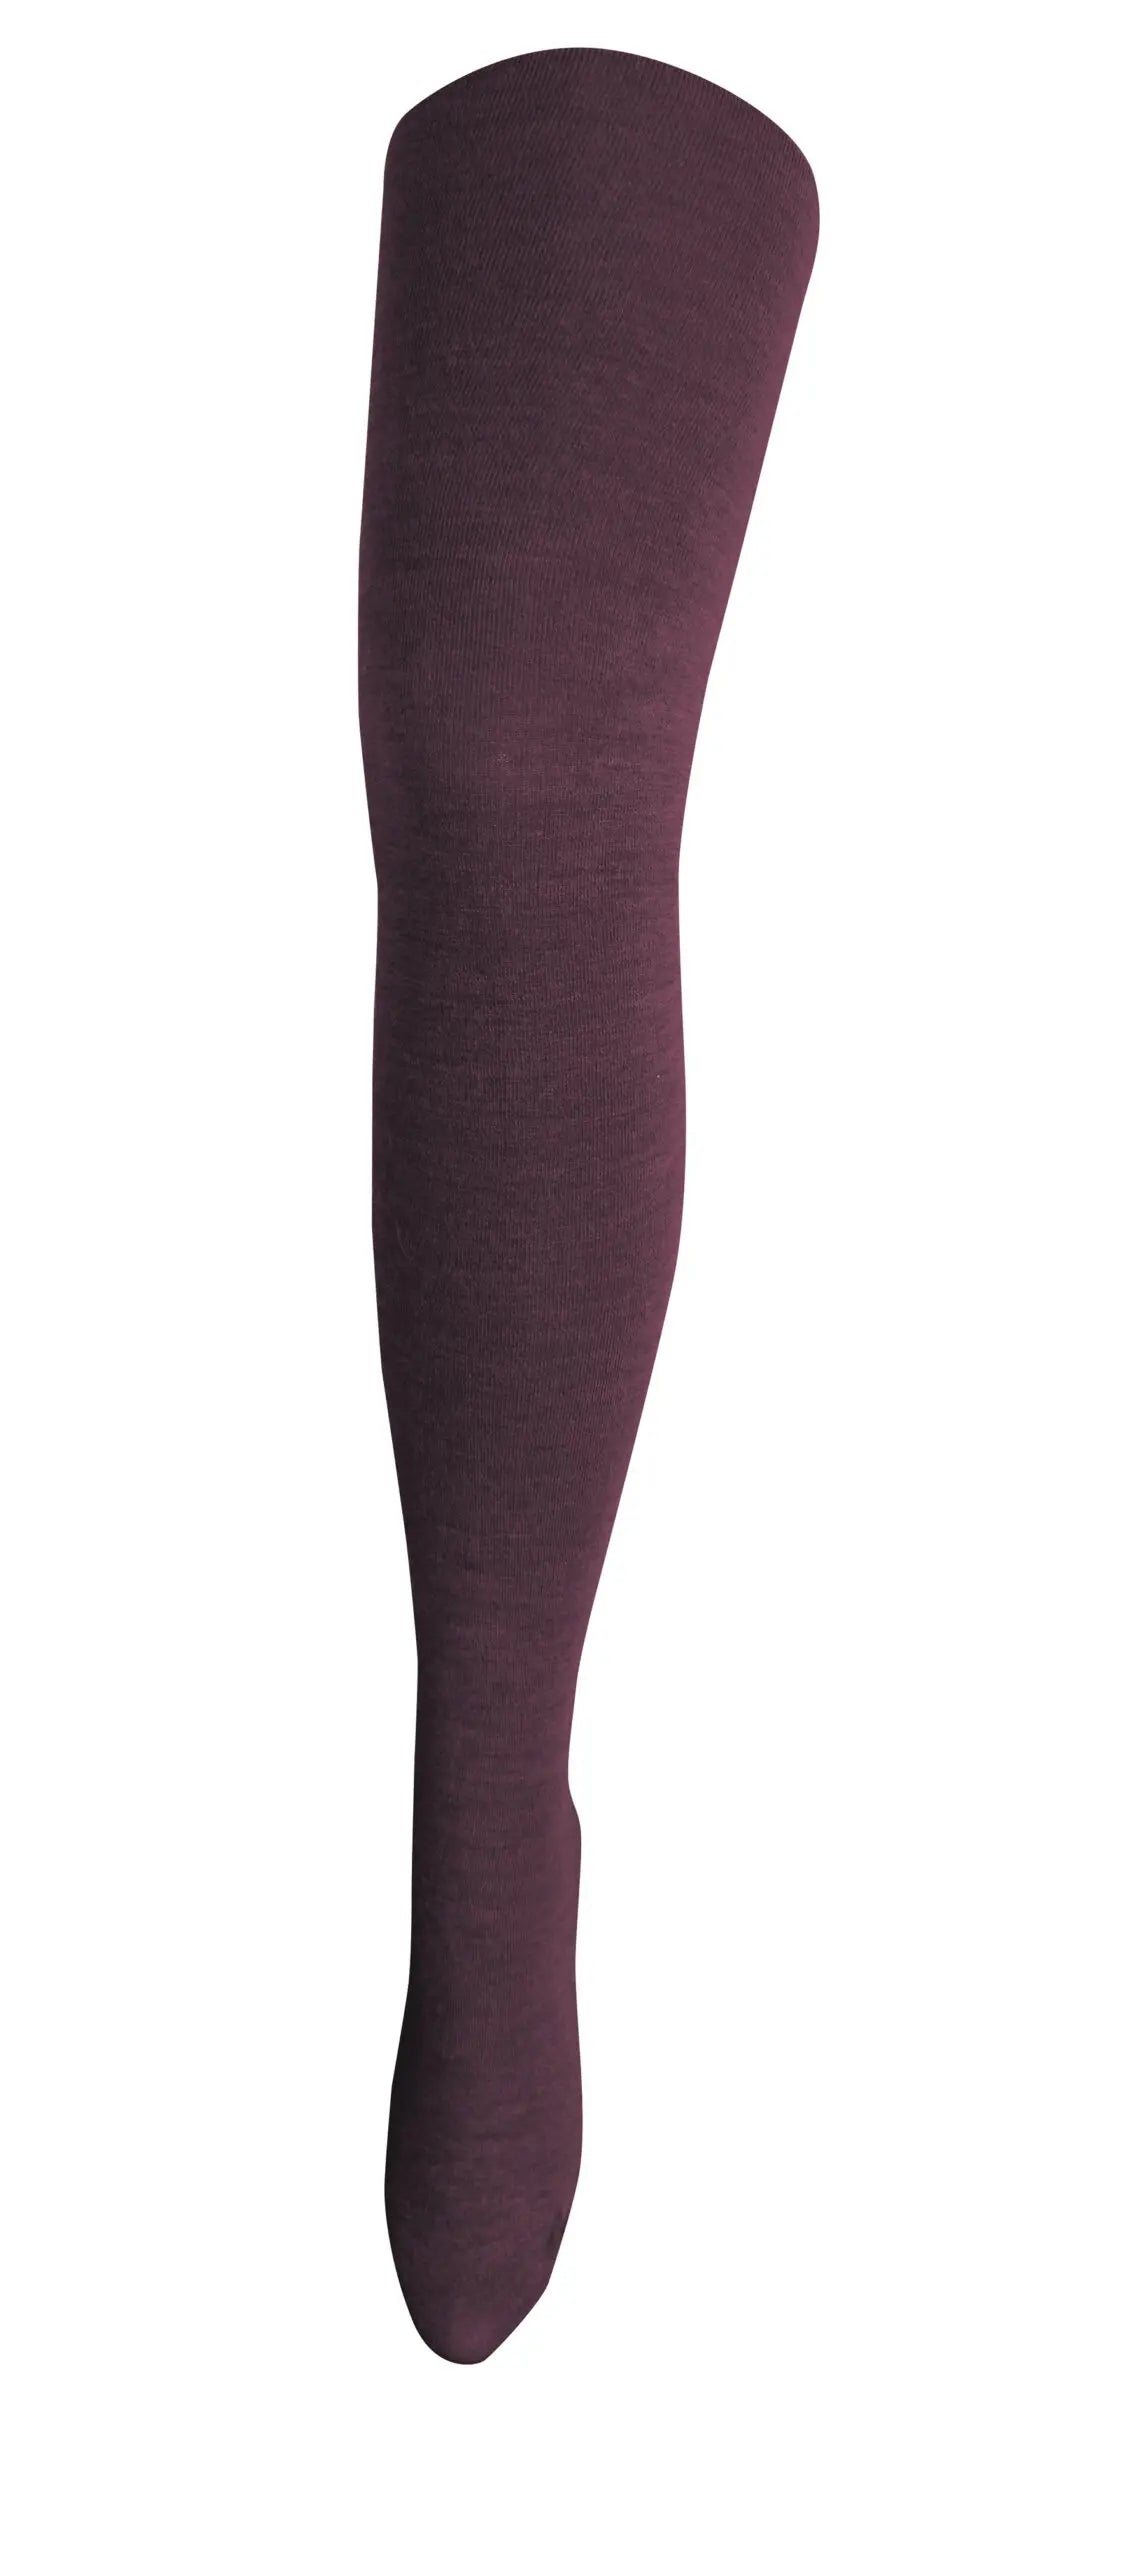 Tightology Luxe Mulberry Merino Wool Tights